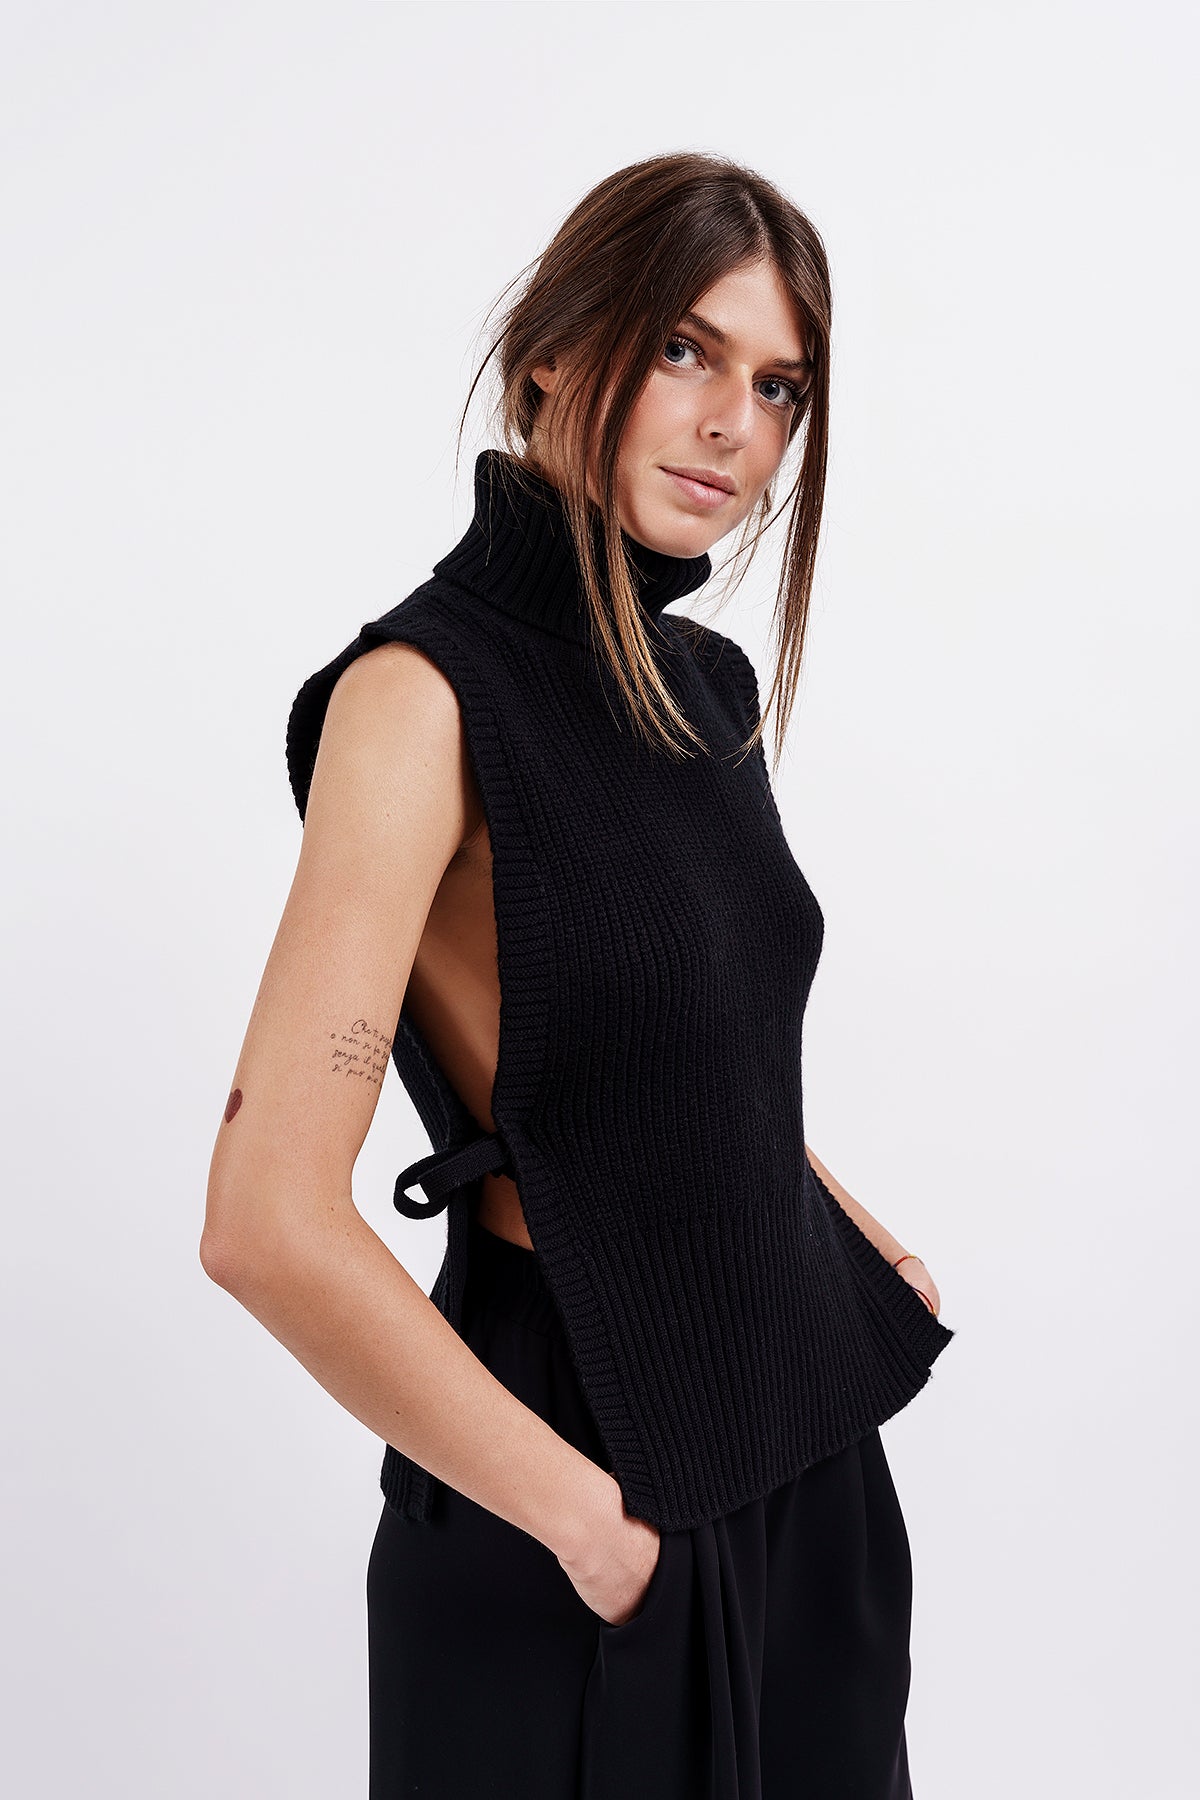 DAVANTINO BLACK TURTLENECK in wool and cashmere